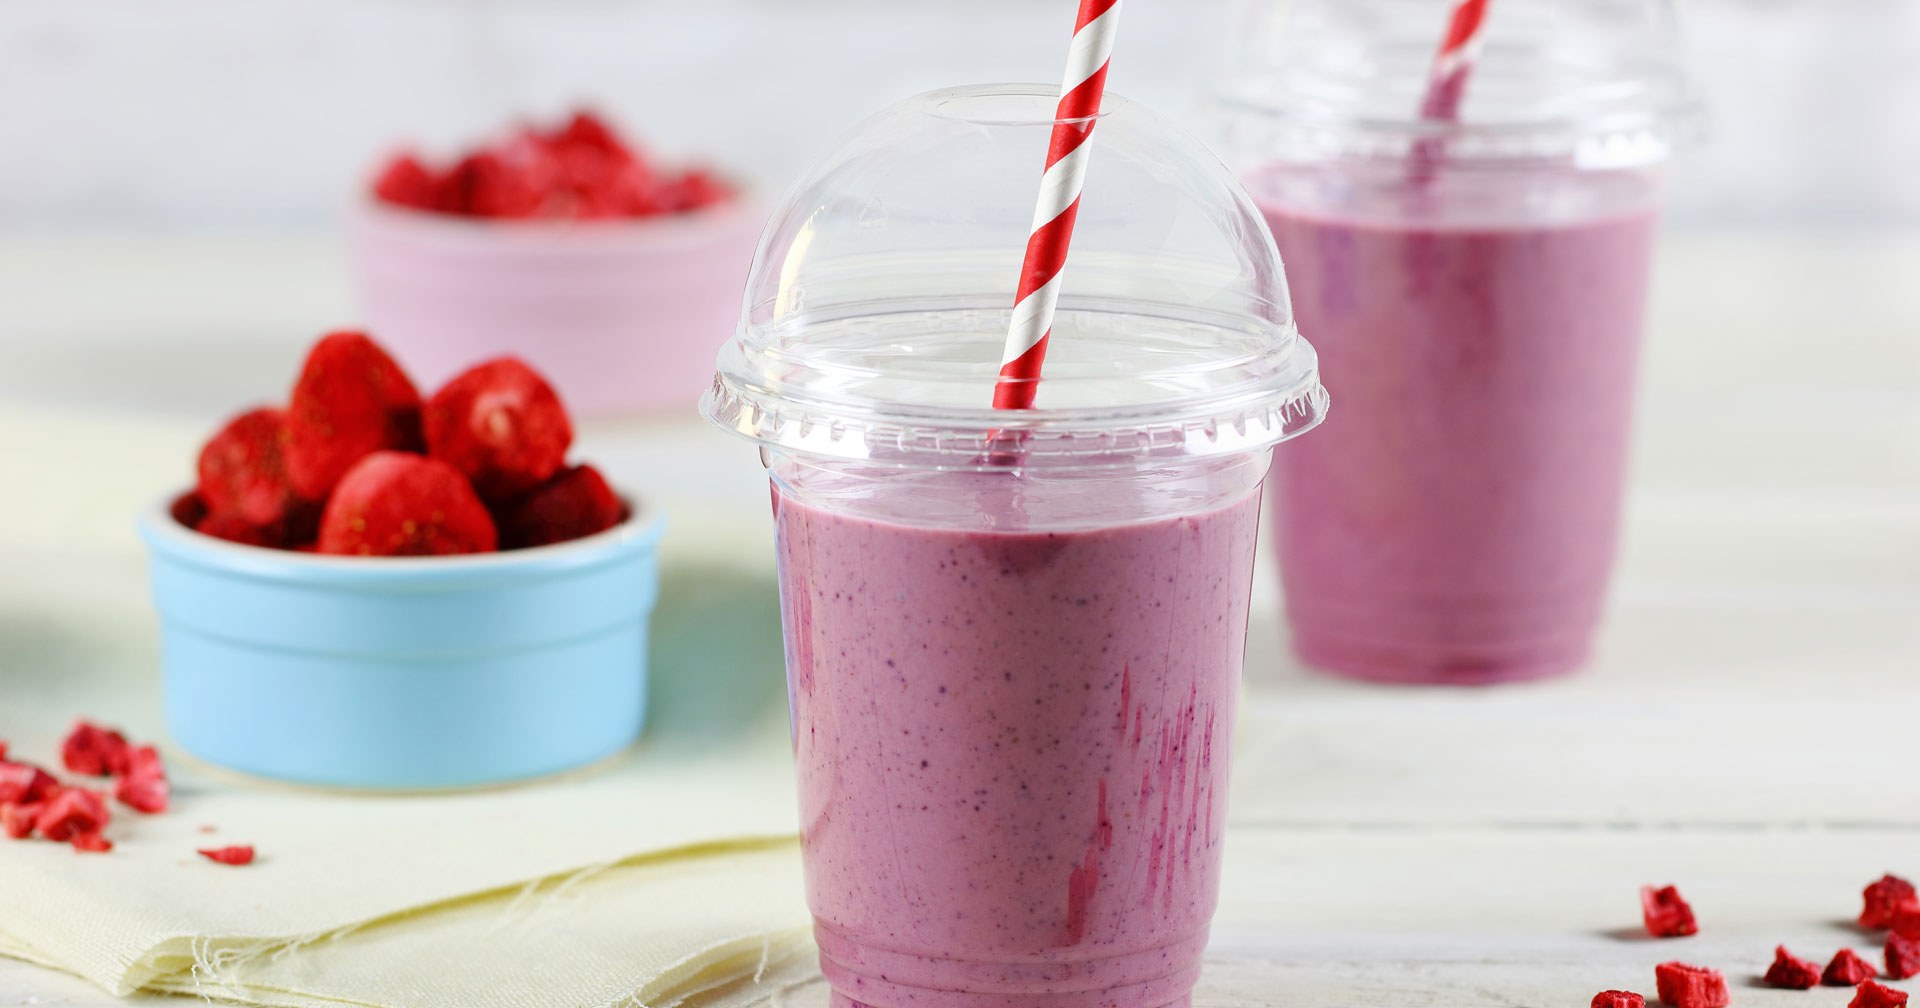 Chaucer Smoothie